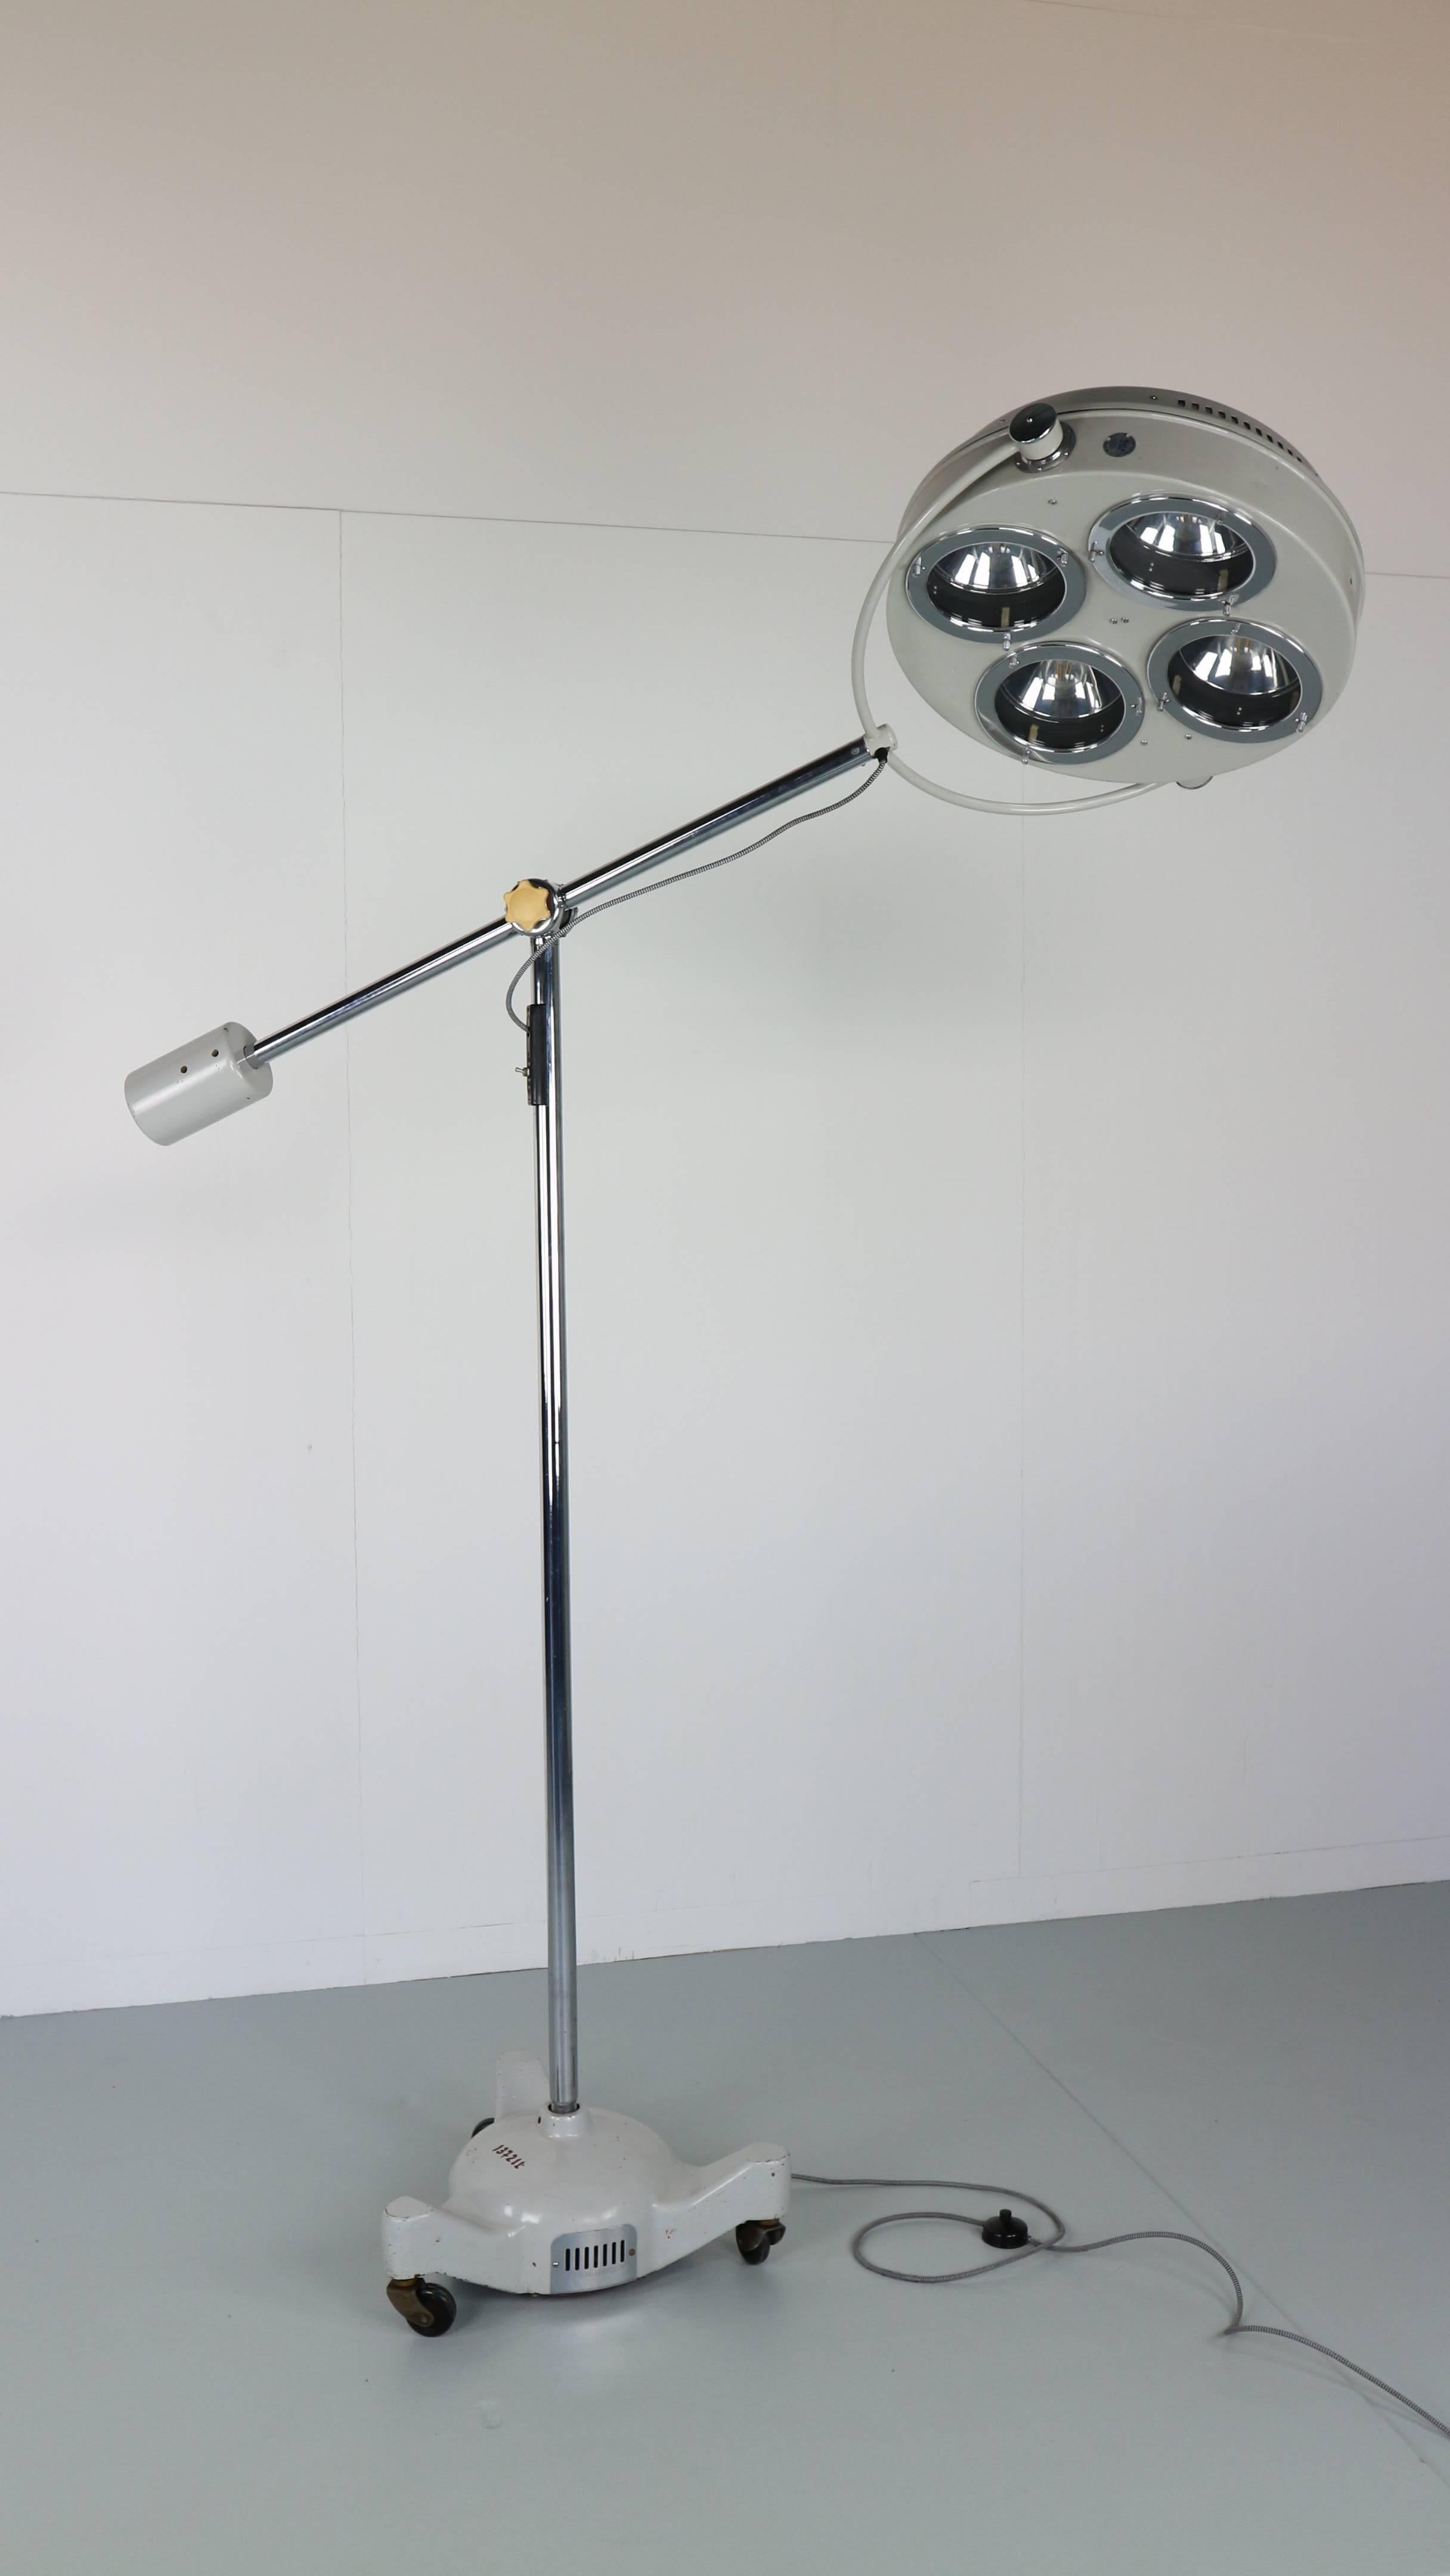 This hospital floor lamp was used for surgery, is made from white] lacquered steel, and is fully functioning.
The lamp is rewired and shows 4x E27 sockets, the arm and shade can be moved.
Ready for use in the USA. Comes with an adapter for use in